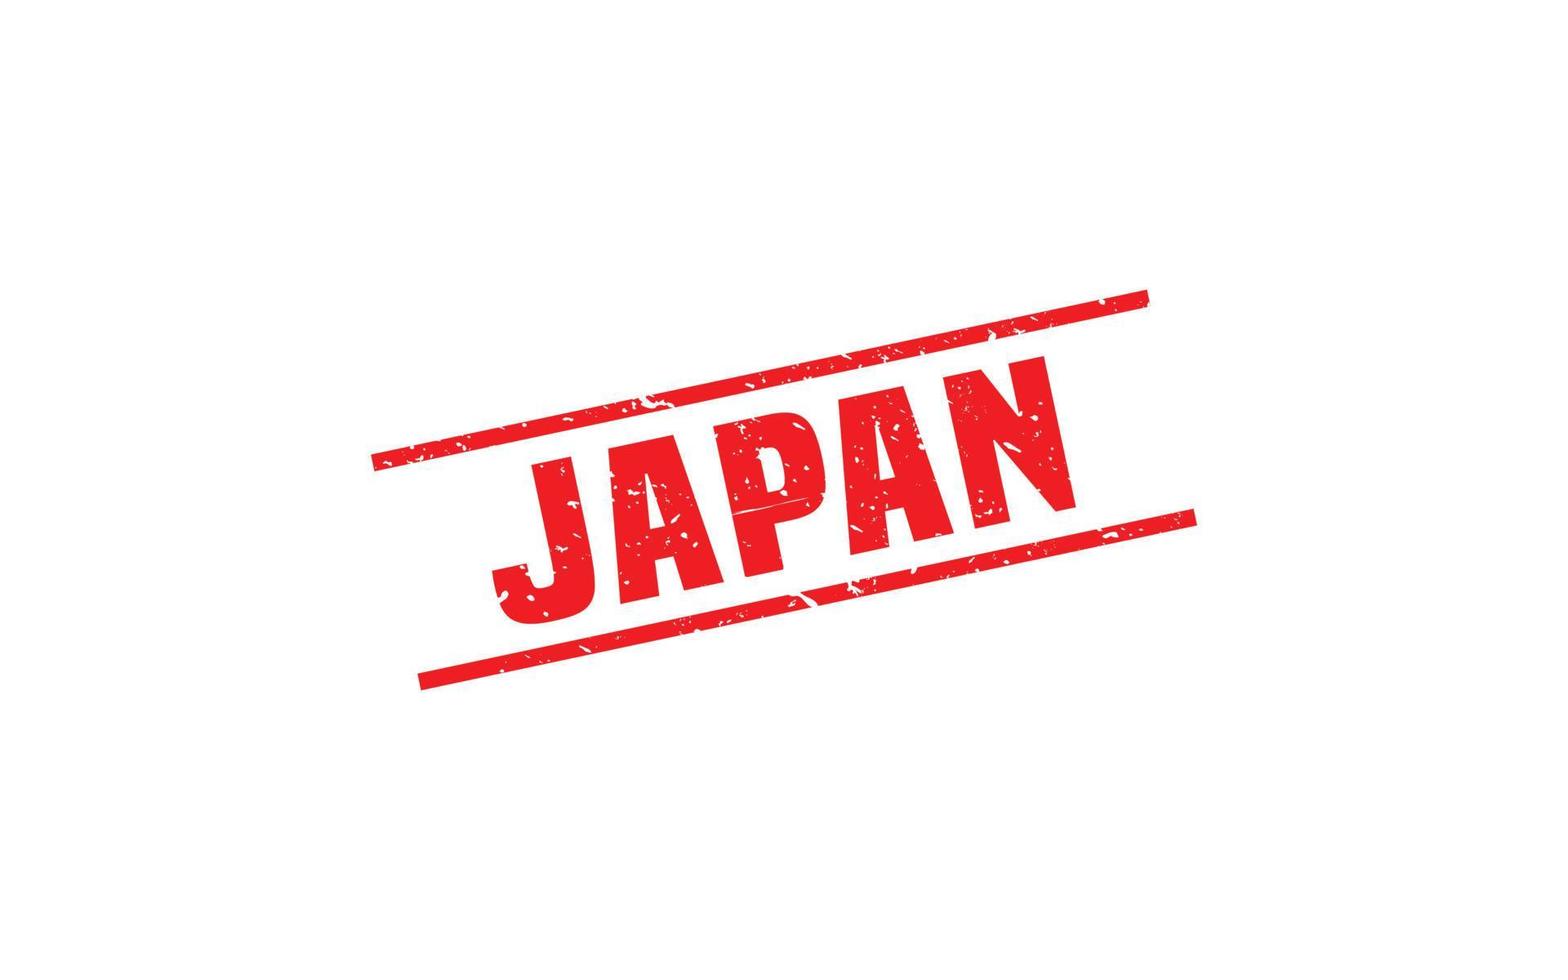 JAPAN stamp rubber with grunge style on white background vector